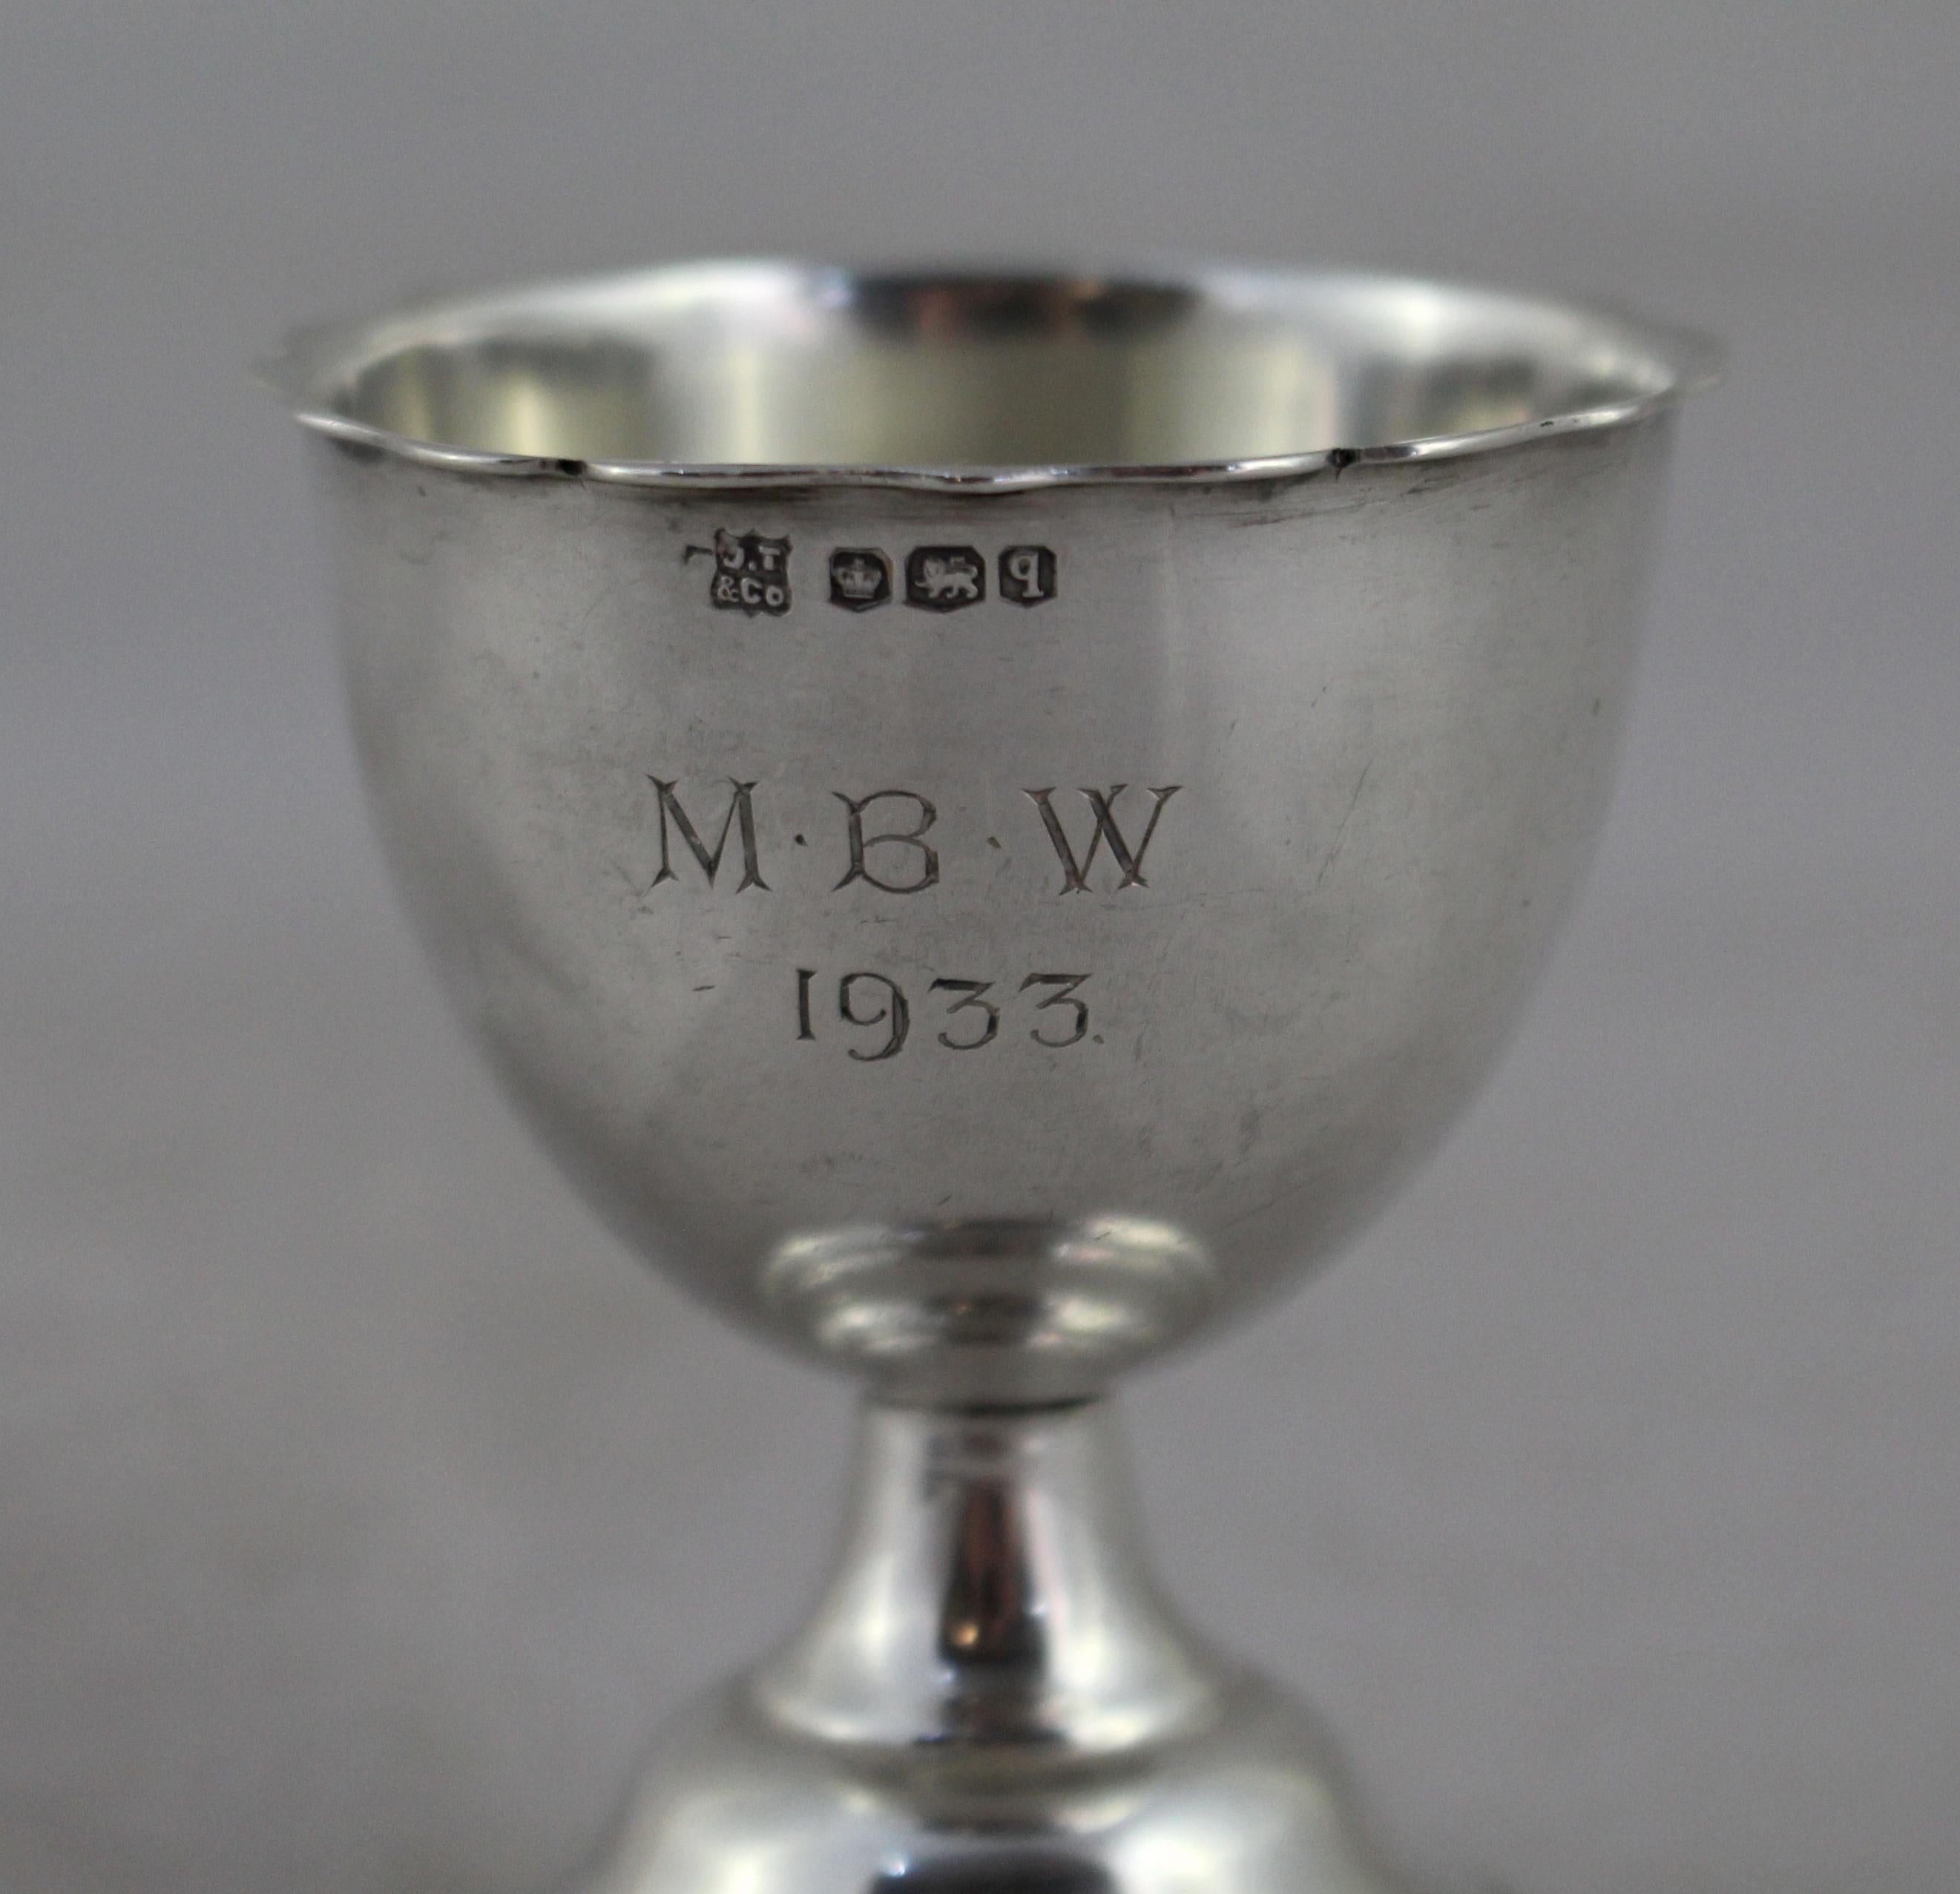 Hallmark Sheffield 1933
Maker John Turton & Co
Composition sterling silver
Measures: Top diameter 5 cm / 2 in
Height 6 cm / 2 1/2 in
Weight 36.4 g
Condition: Very good condition commensurate with age. Fully hallmarked. Monogram to